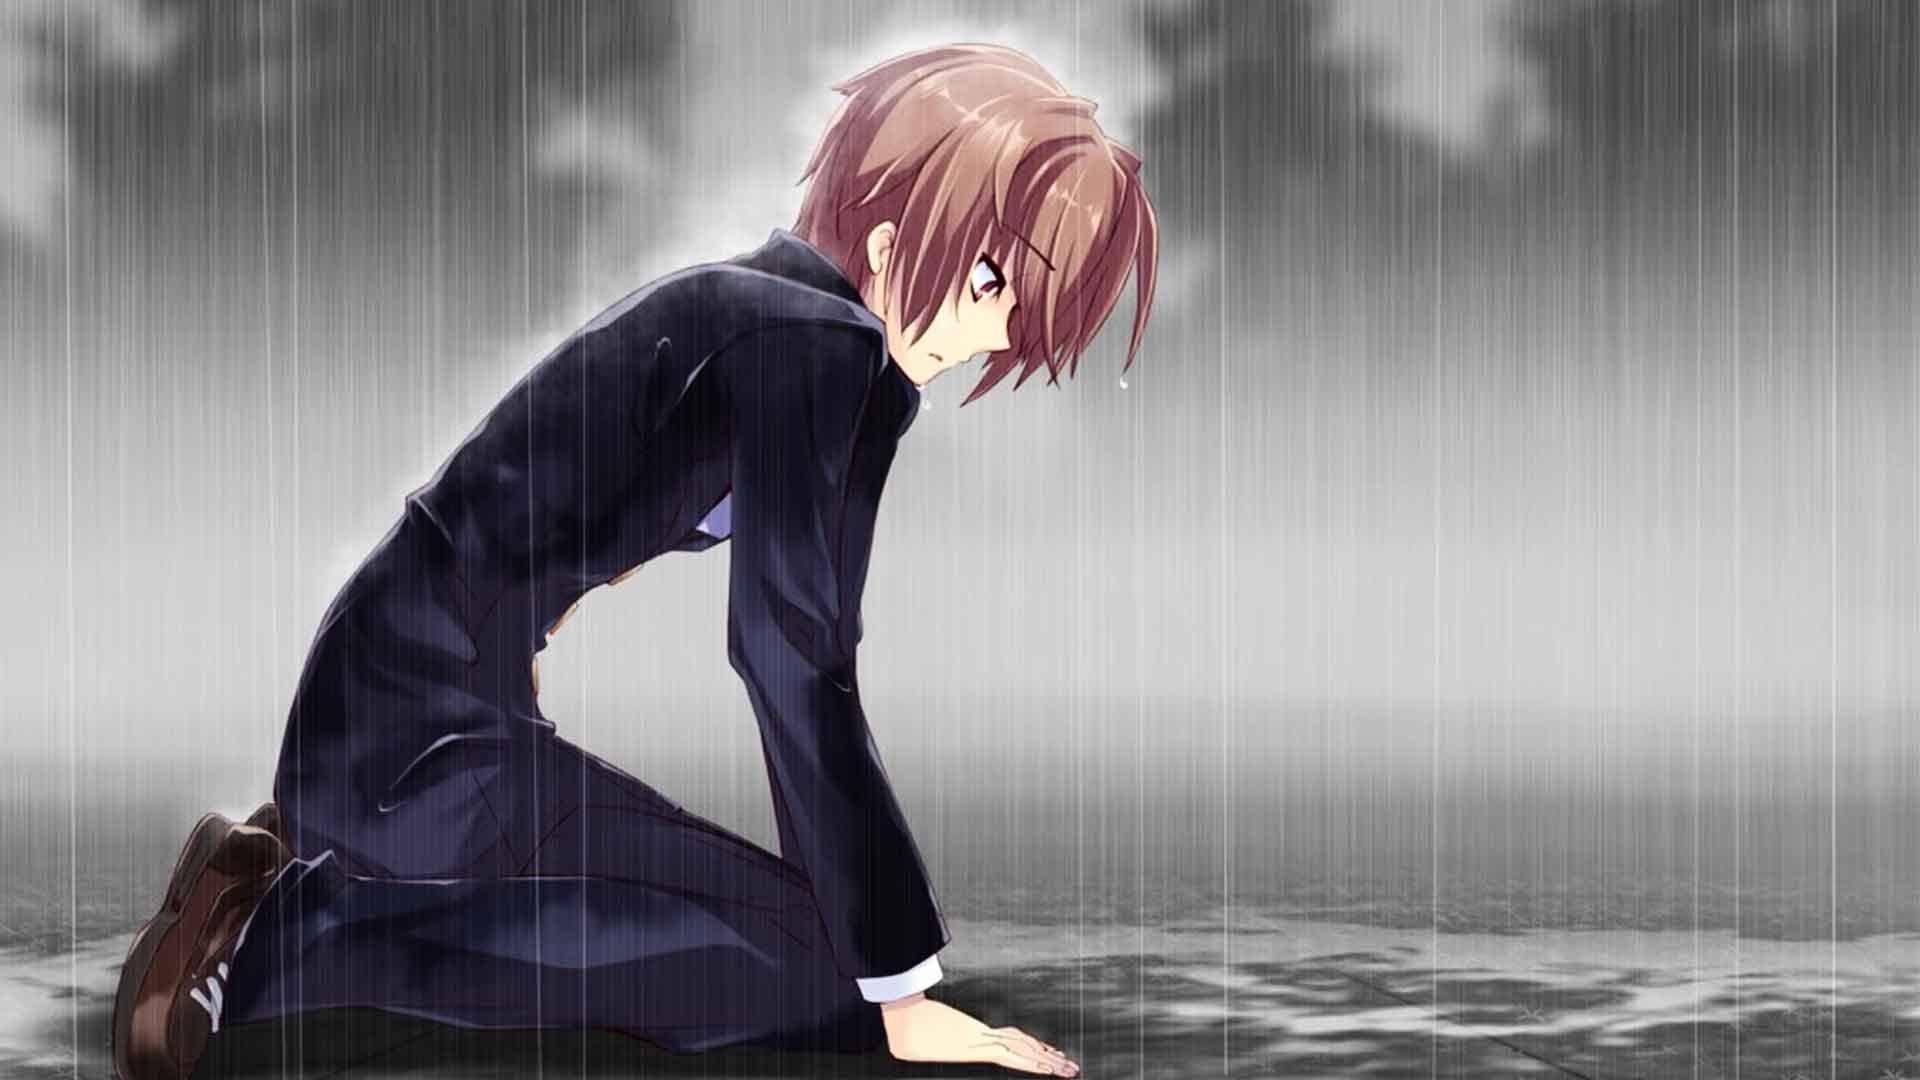 Cartoon Anime Boy Cry Wallpapers - Wallpaper Cave